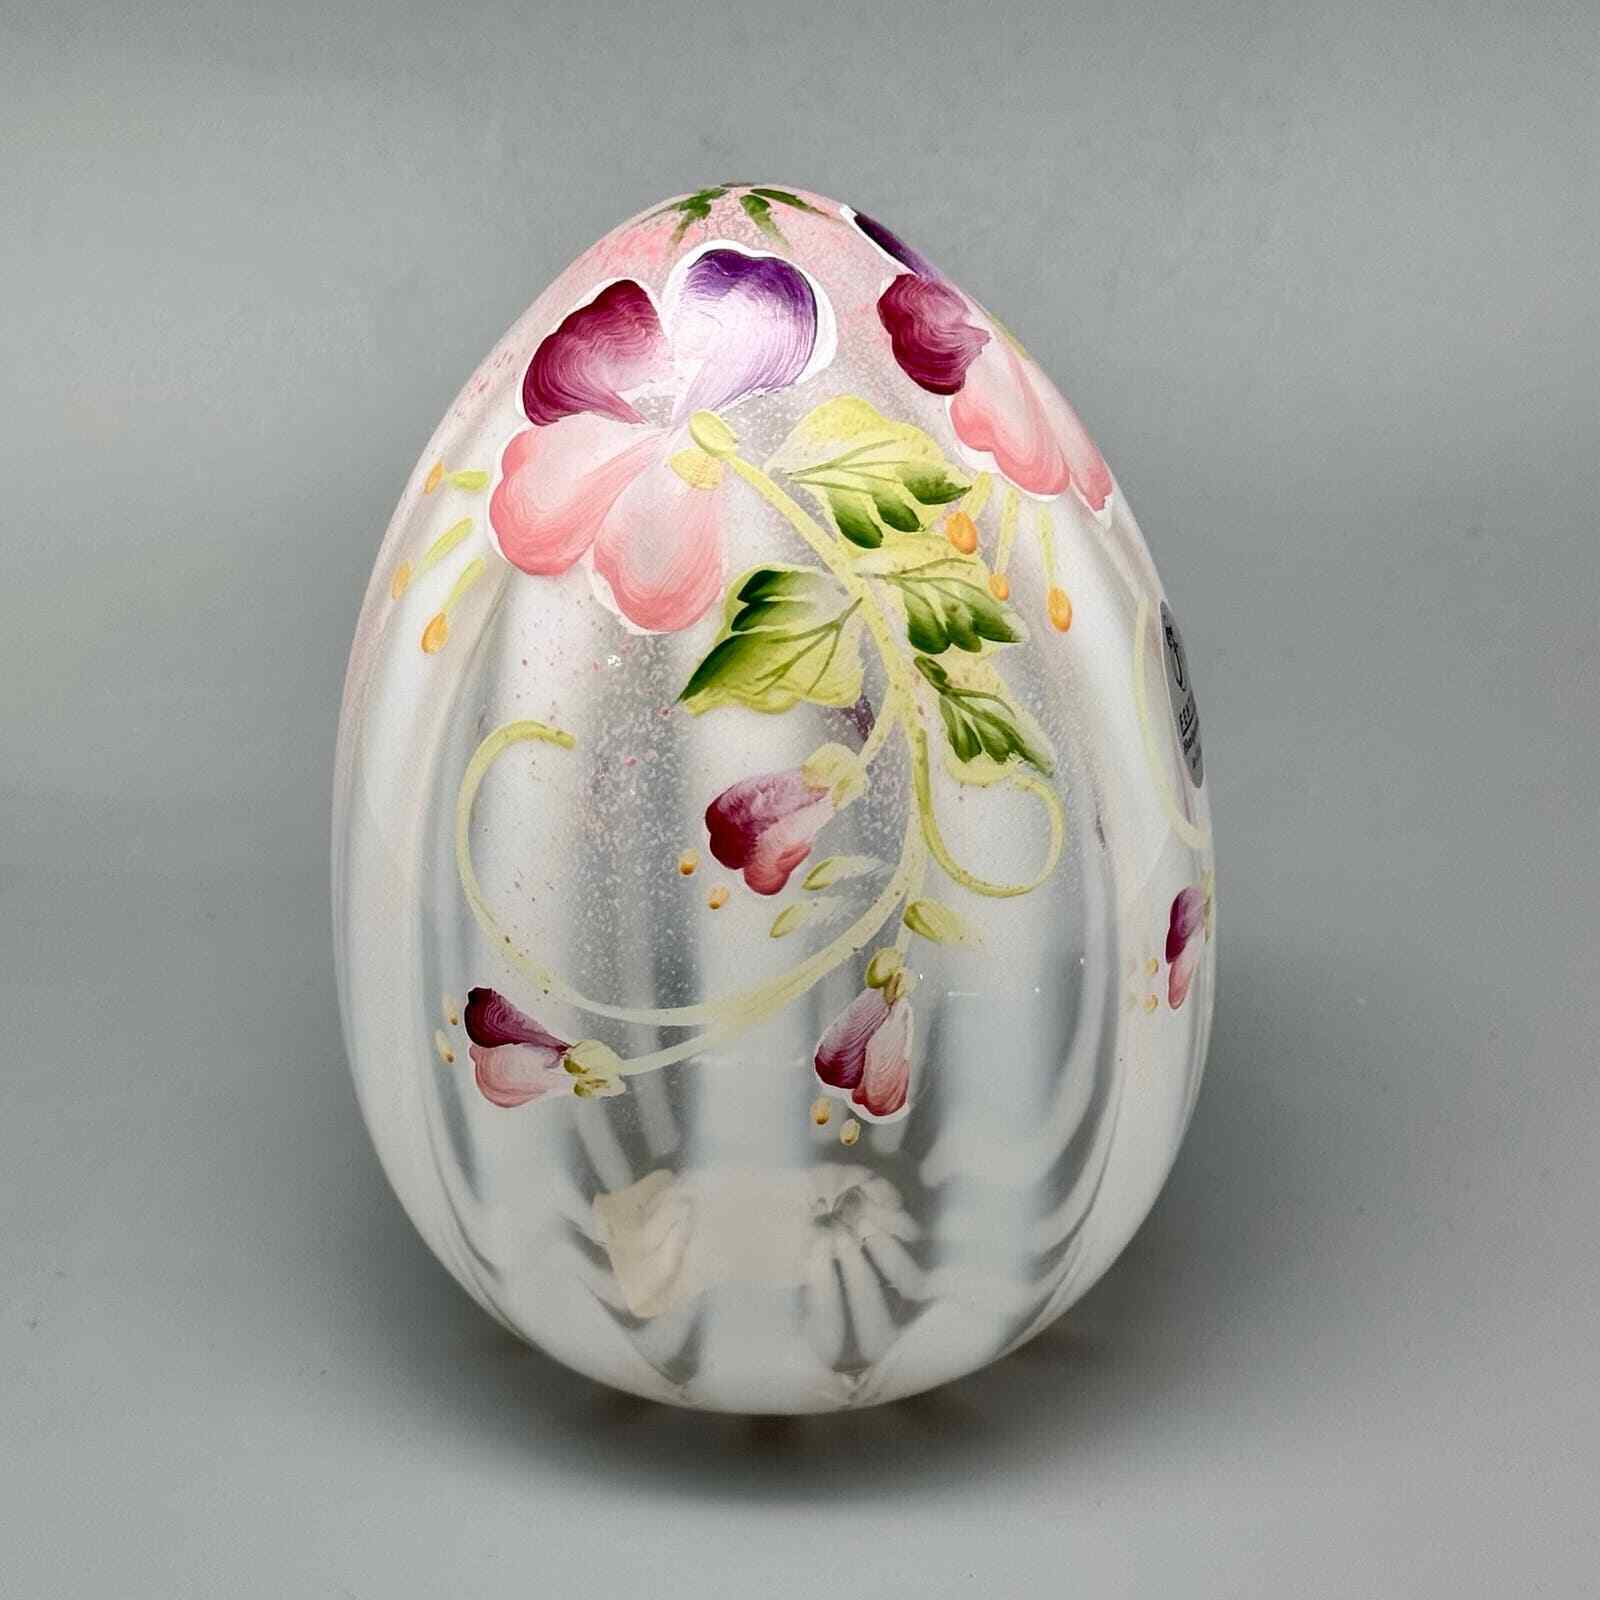 Fenton Glass Limited Edition Hand Painted White Opalescent Egg Figurine